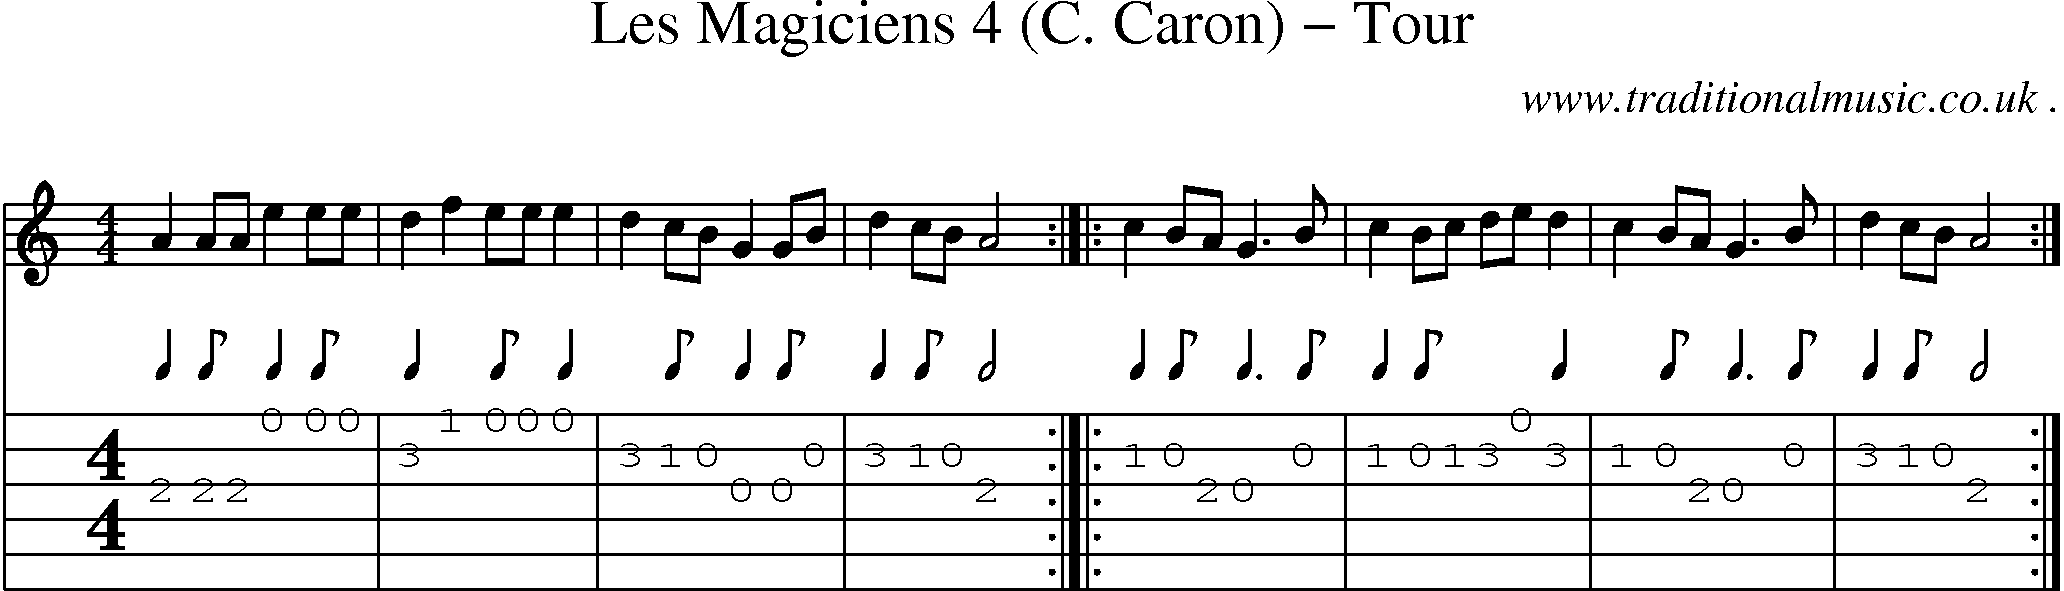 Sheet-Music and Guitar Tabs for Les Magiciens 4 (c Caron) Tour